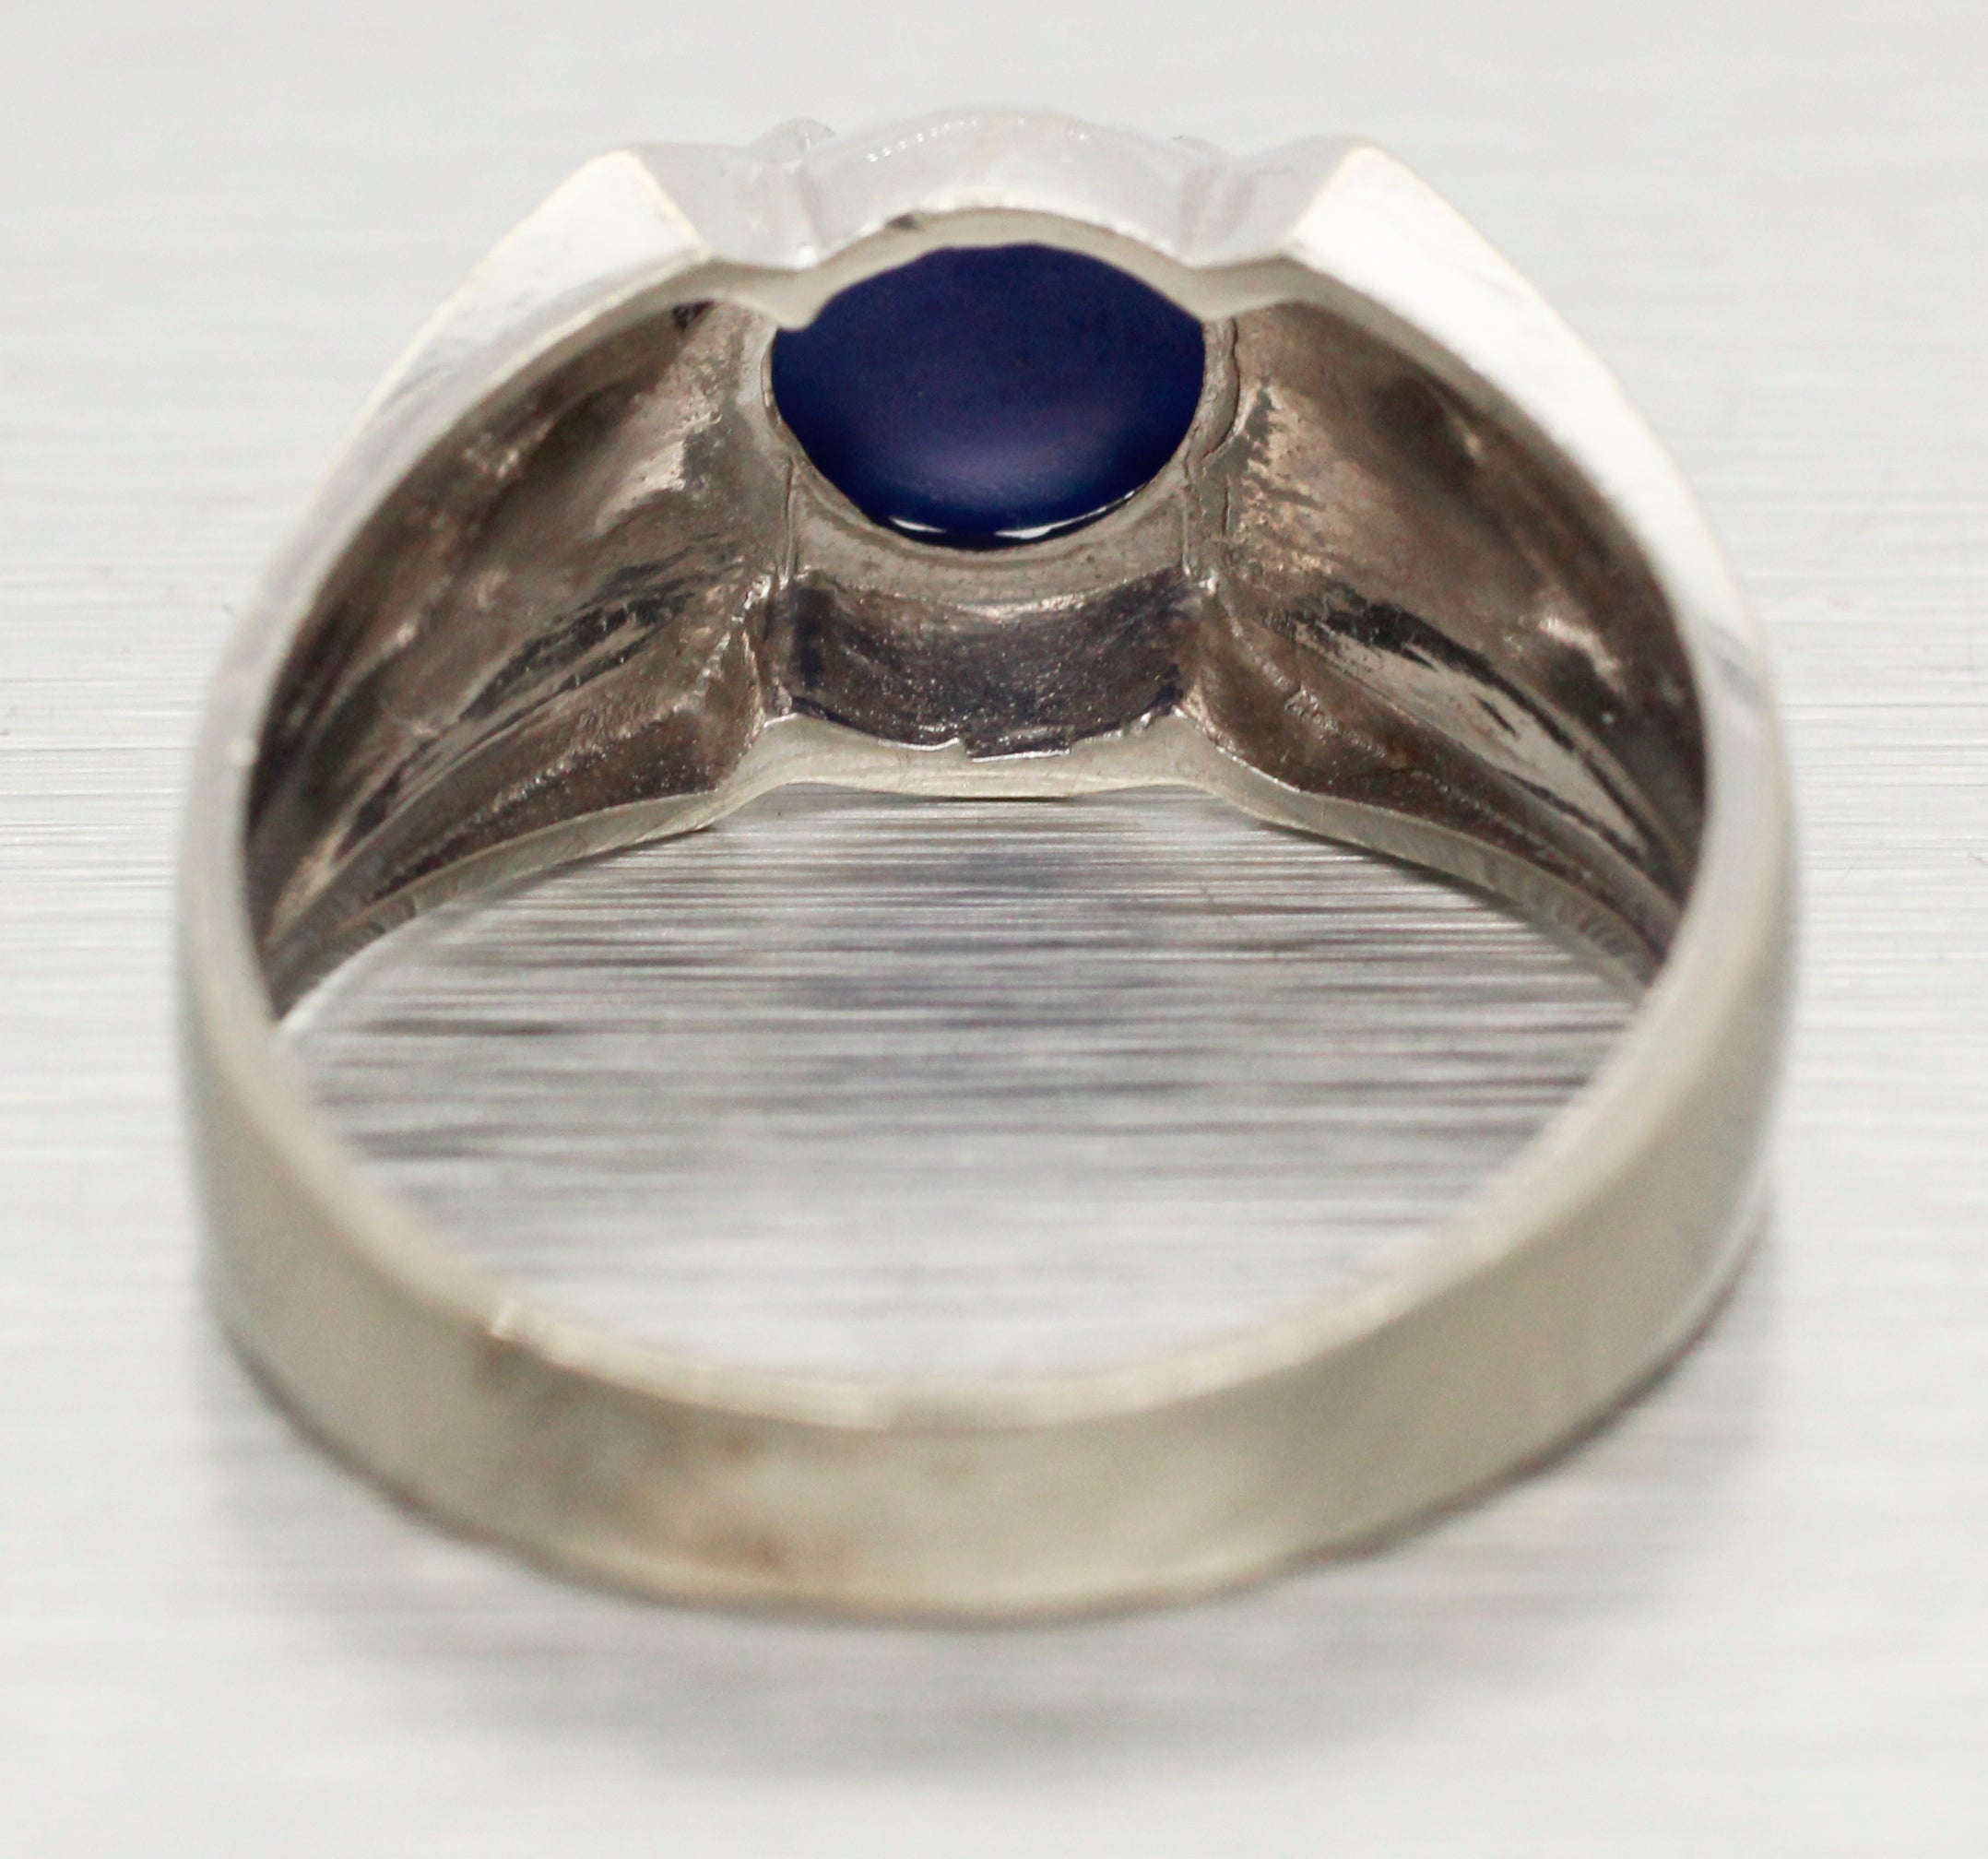 Modern Solitaire 1.40ct Blue Star Sapphire Ring - 14k White Gold - Size 9